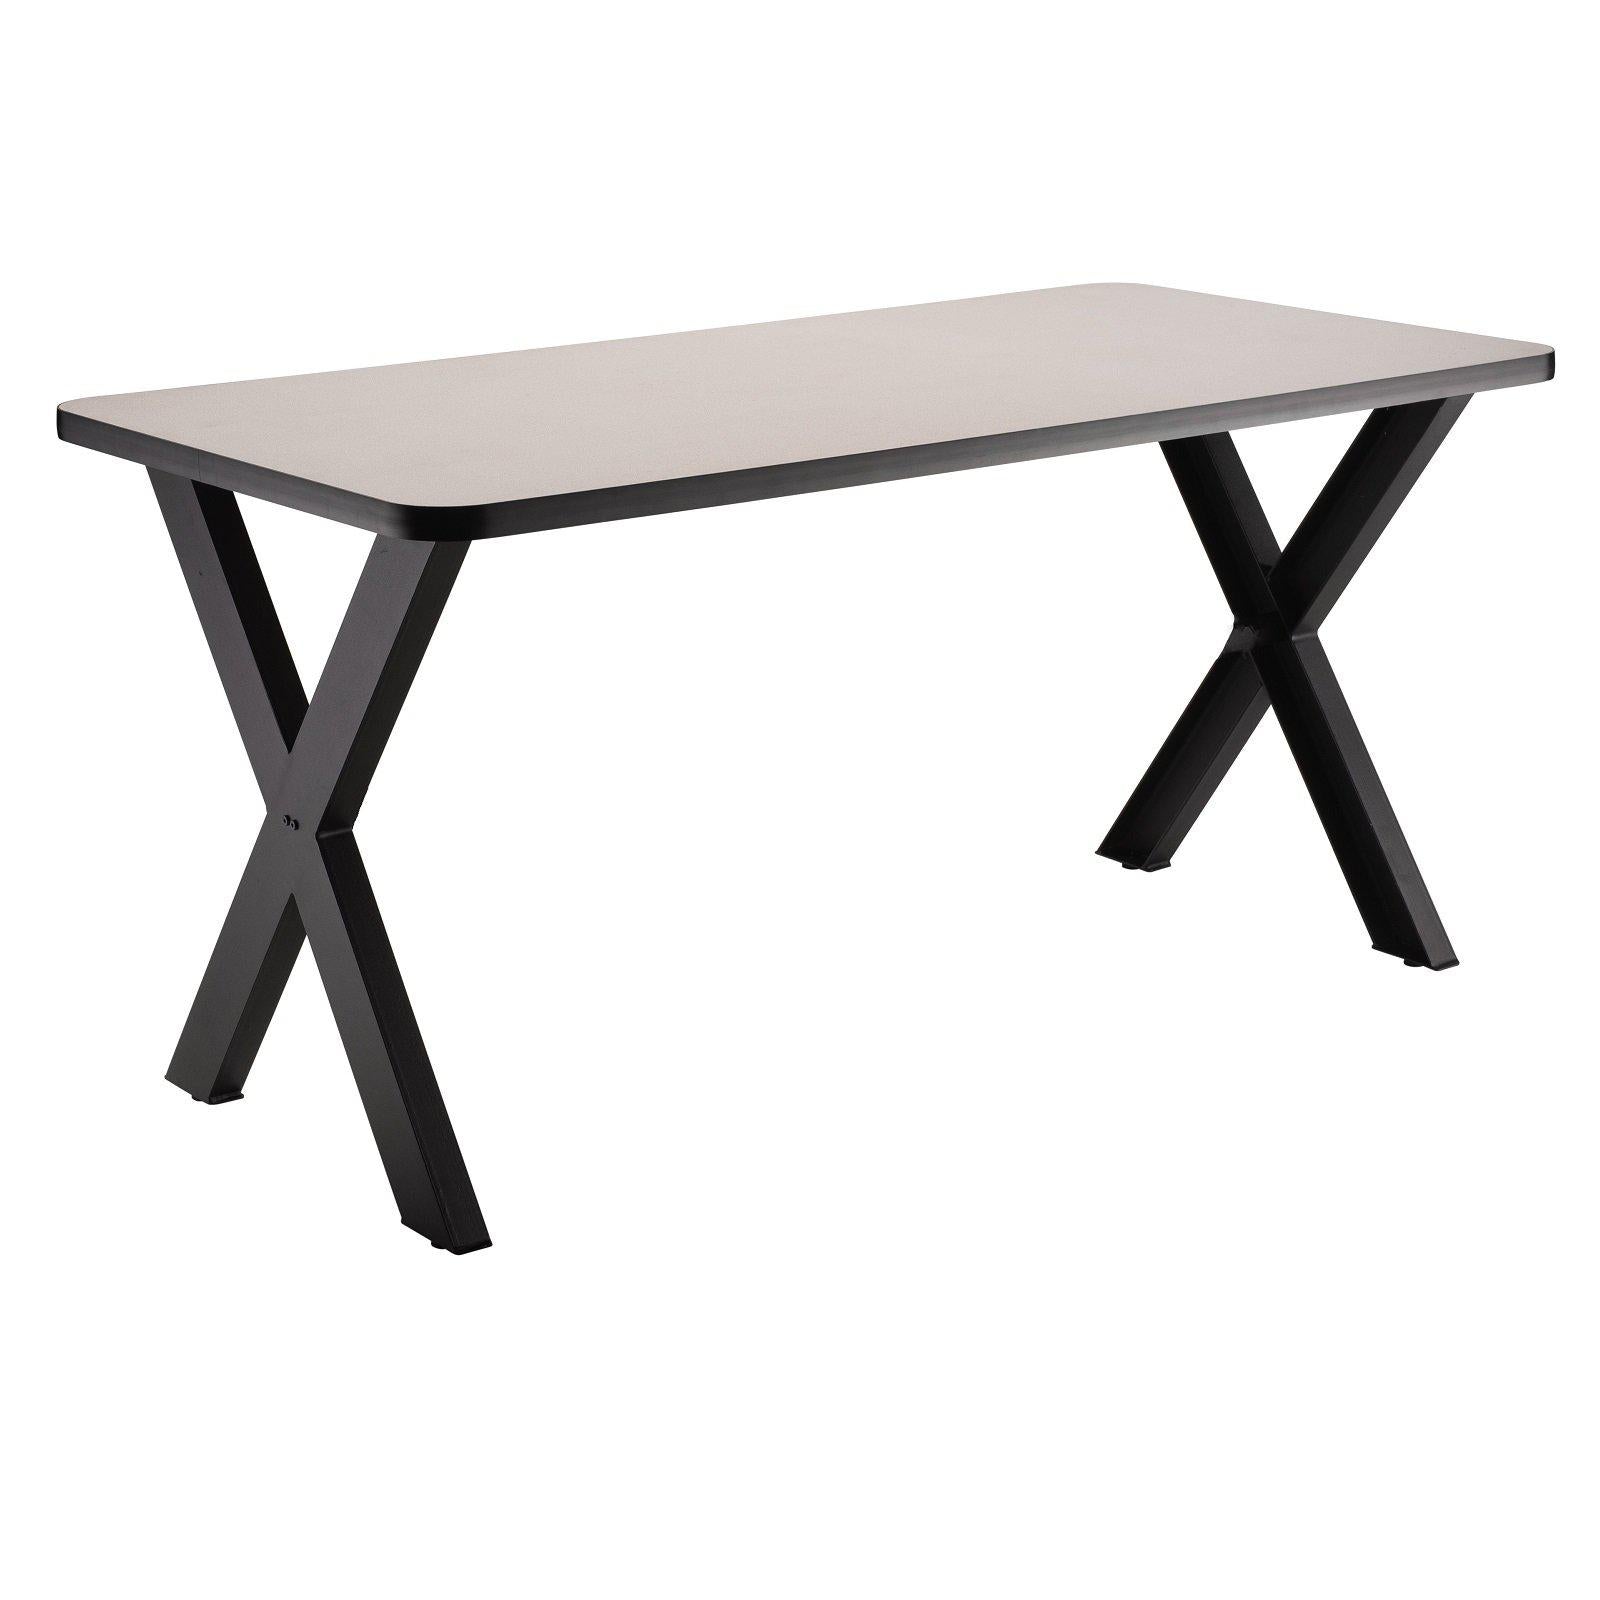 Collaborator Table, 30" x 60", Rectangle, 30" Dining Height, High Pressure Laminate Top, MDF Core